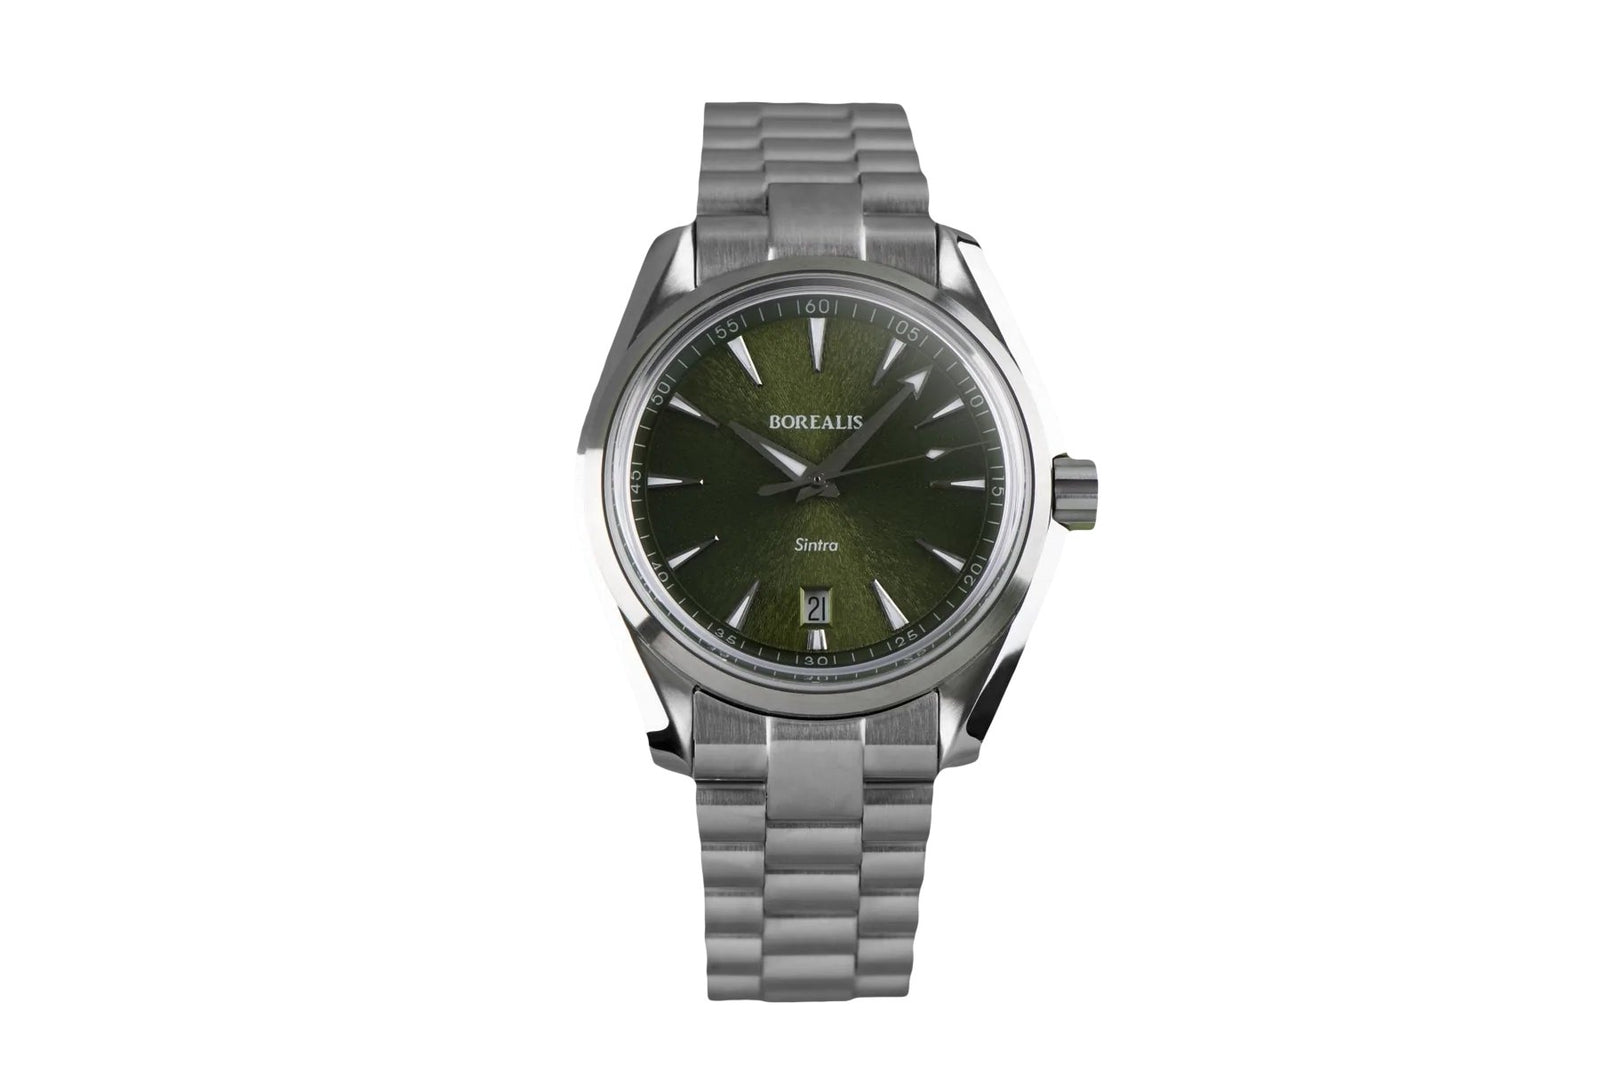 Buy top-notch quality Sintra watches | Borealis Watch Company